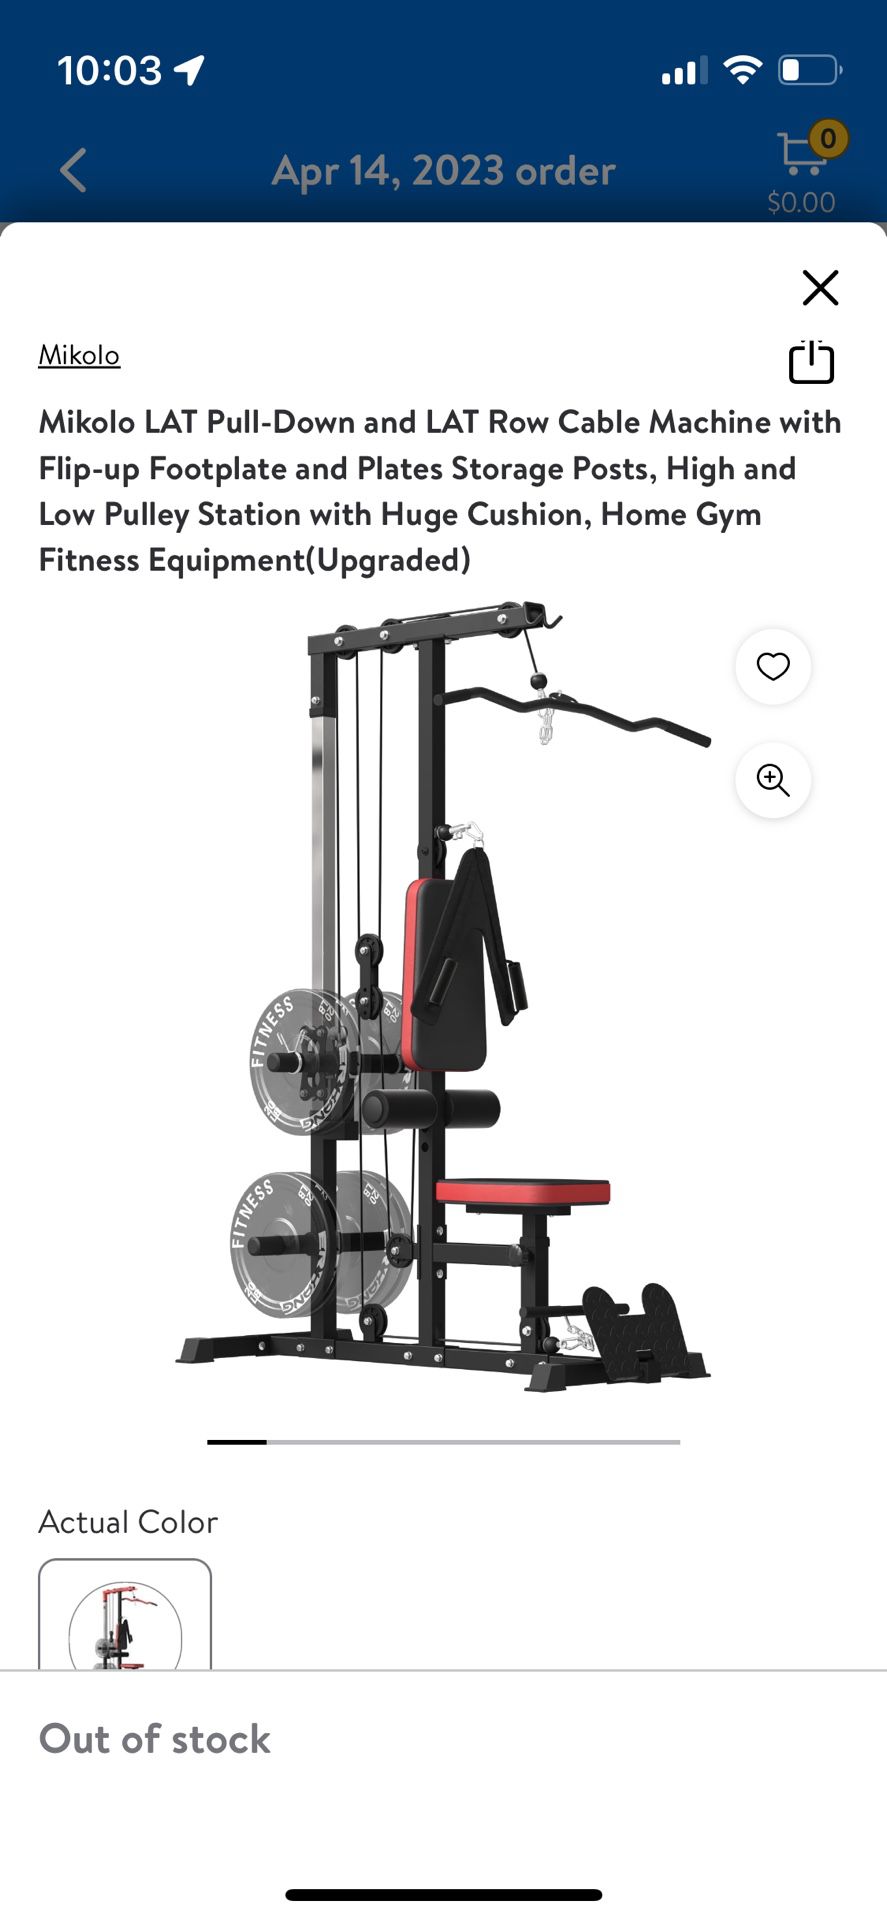 Mikolo LAT Pull-Down and Lat Row Cable Machine